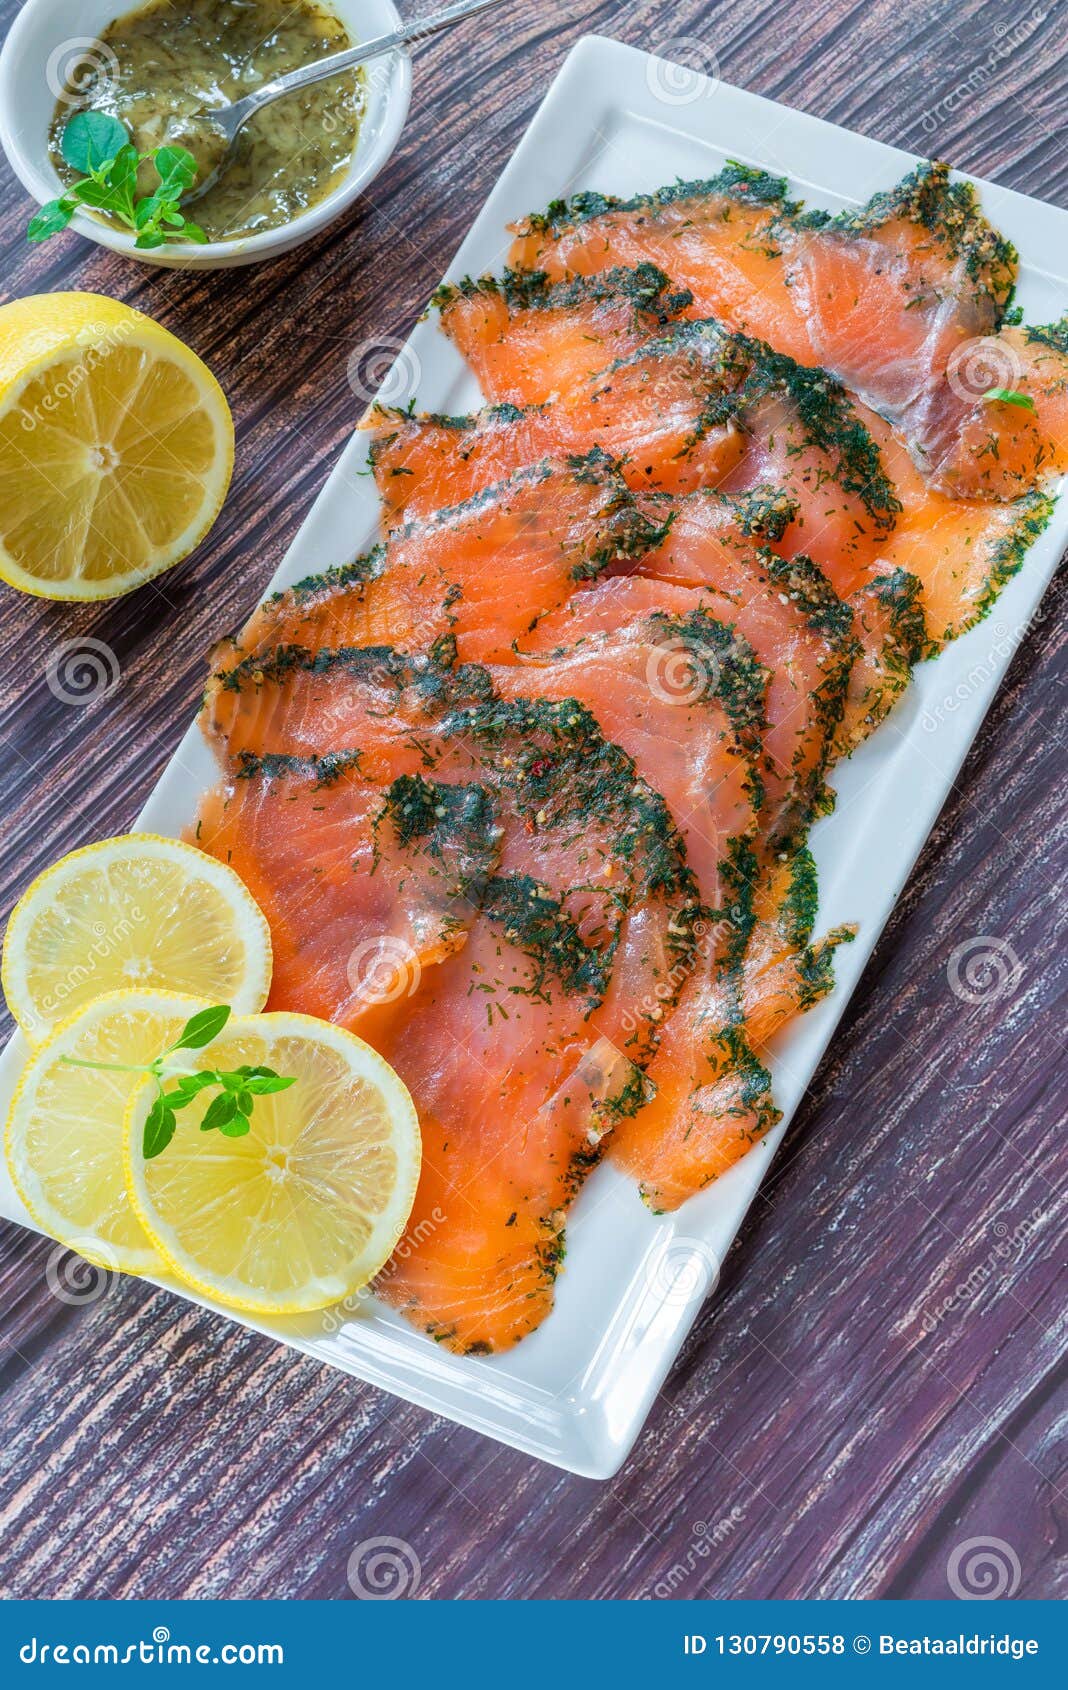 Gravadlax - Nordic Dish of Thinly Sliced Raw Salmon Cured in Salt ...